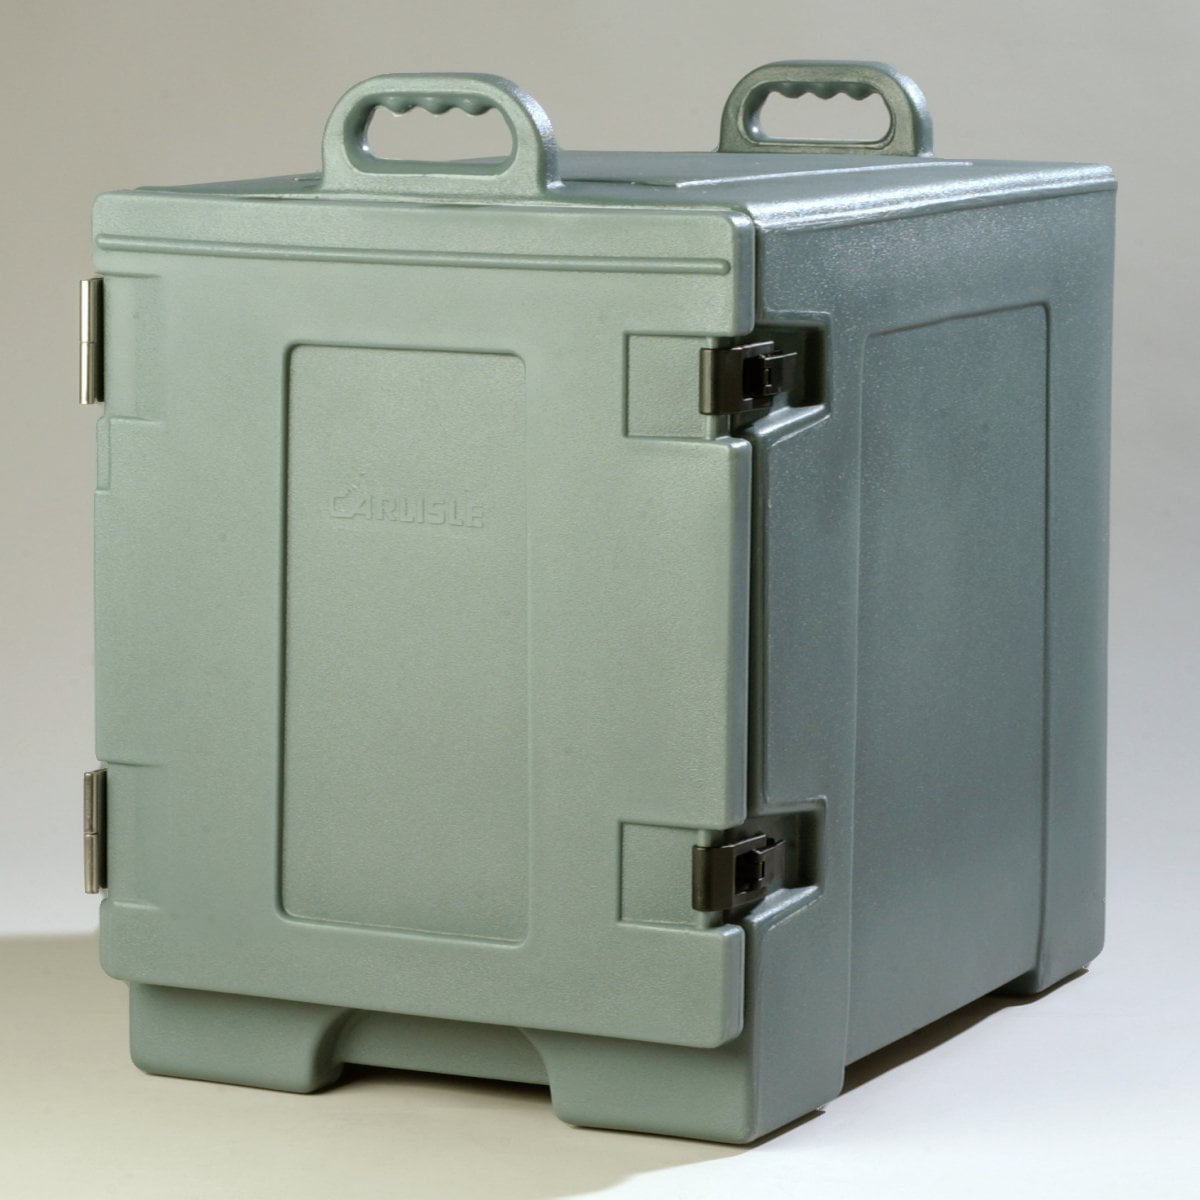 33L Military Insulated Top Loading Food Pan Carriers For Army Food  Distribution